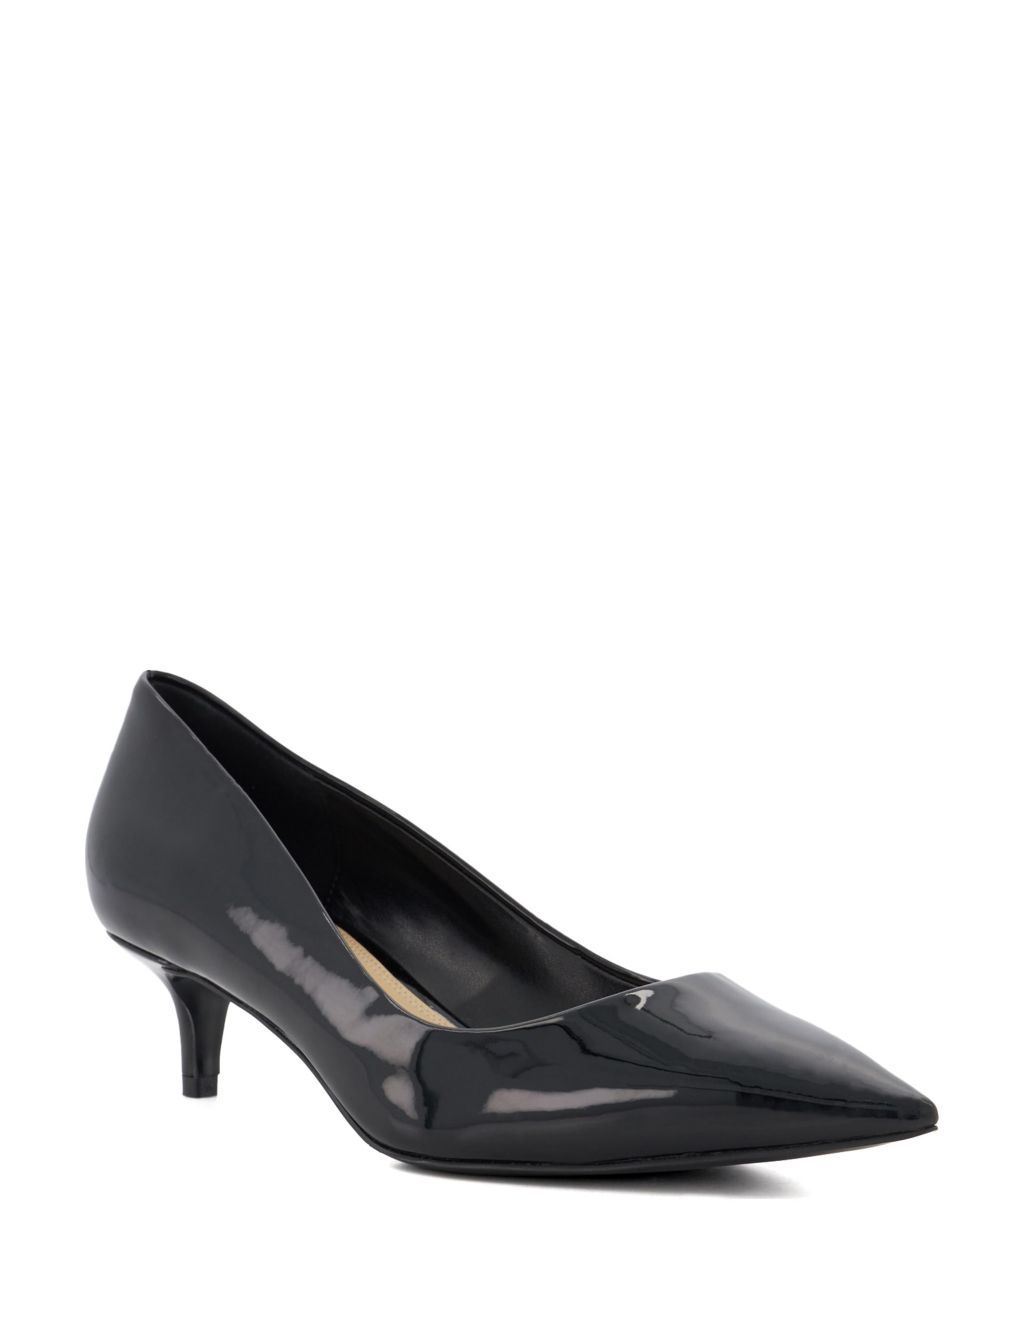 Patent Kitten Heel Pointed Court Shoes | Dune London | M&S